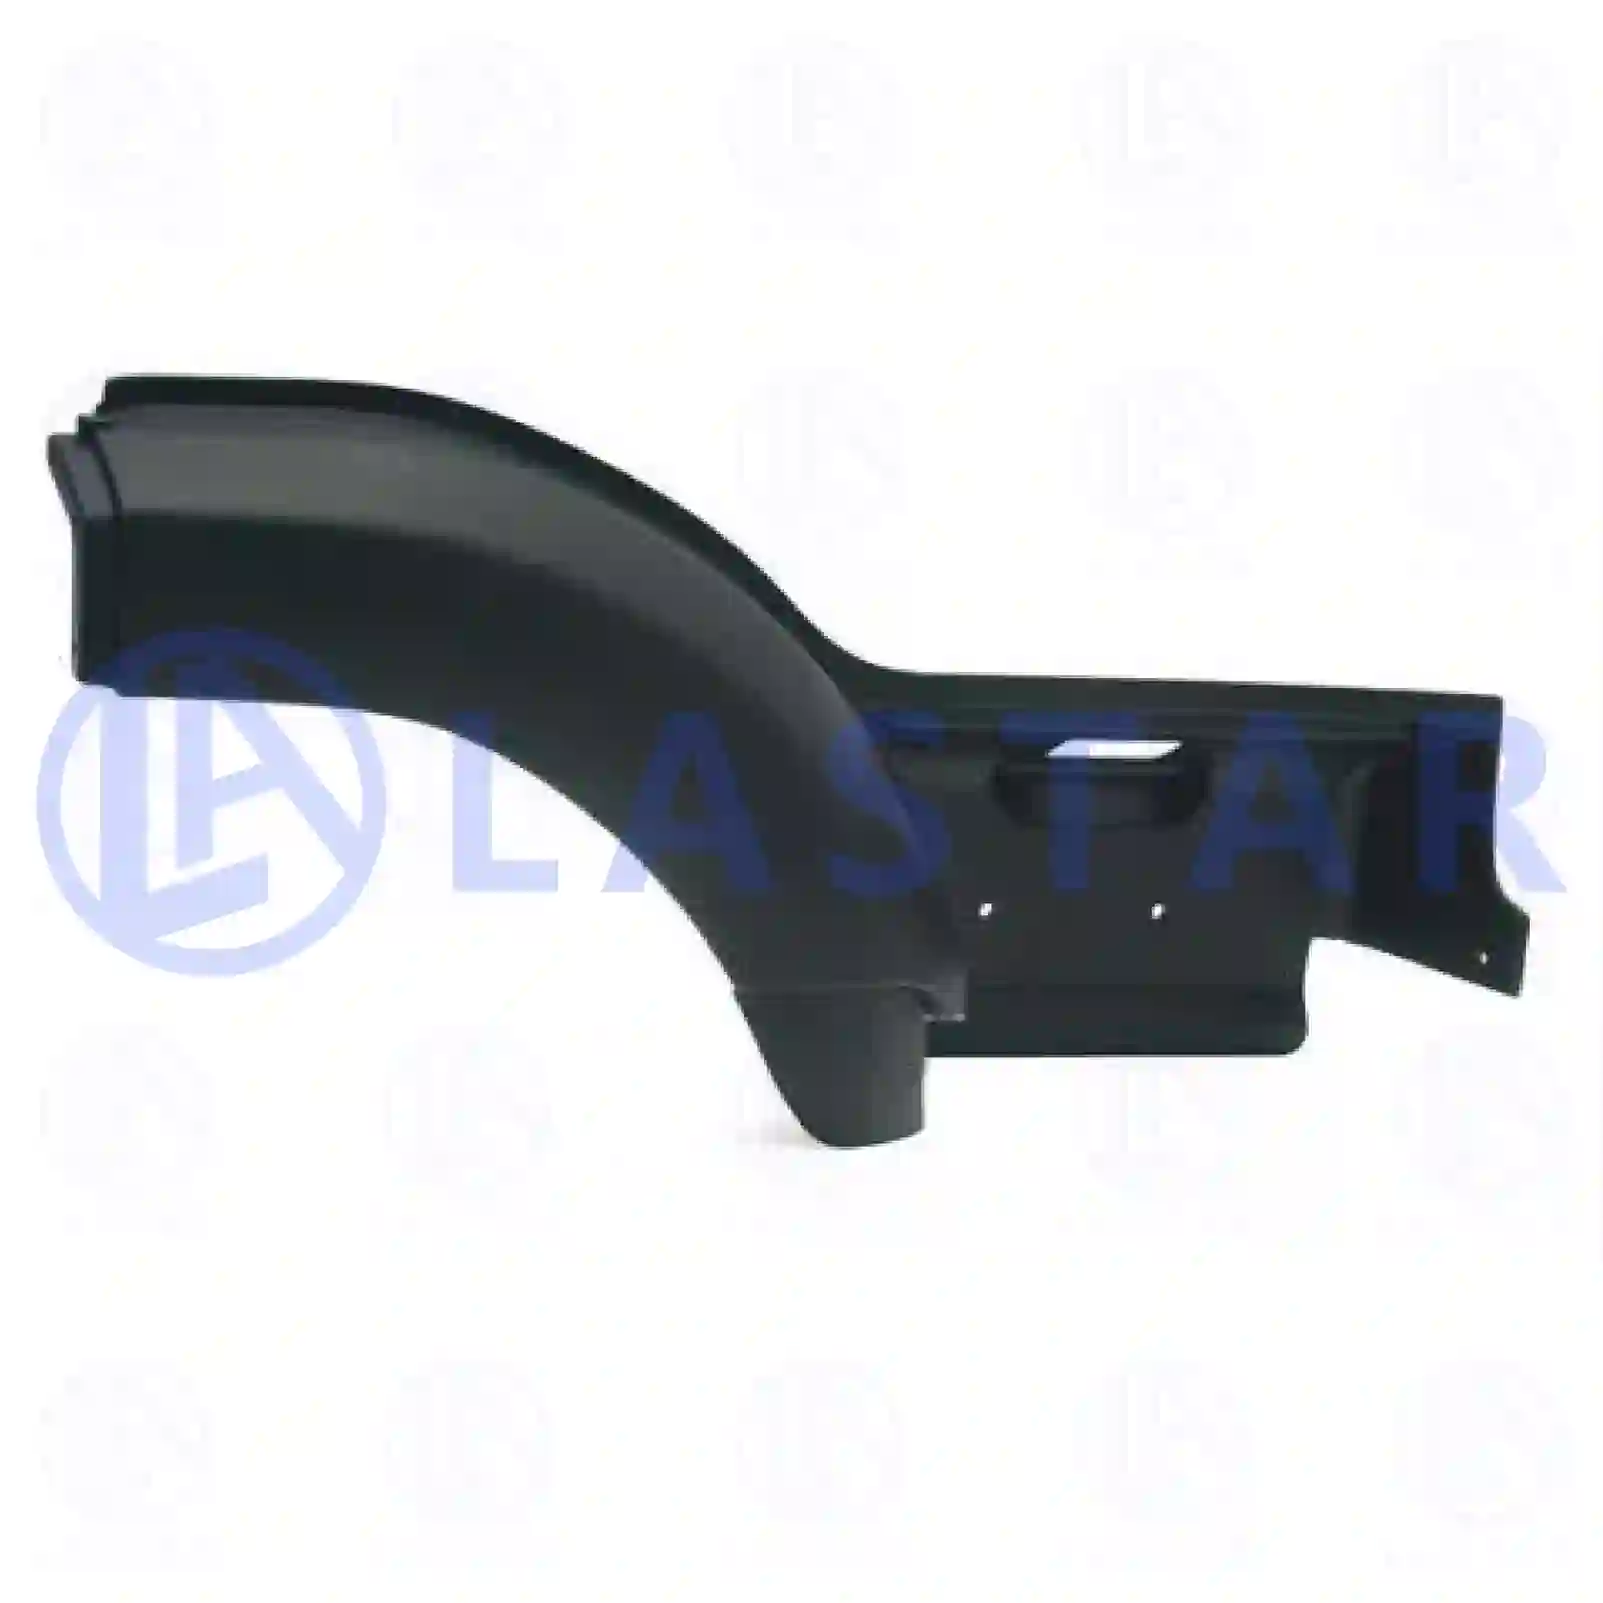 Step well case, right, 77720744, 8144329, 8144329 ||  77720744 Lastar Spare Part | Truck Spare Parts, Auotomotive Spare Parts Step well case, right, 77720744, 8144329, 8144329 ||  77720744 Lastar Spare Part | Truck Spare Parts, Auotomotive Spare Parts